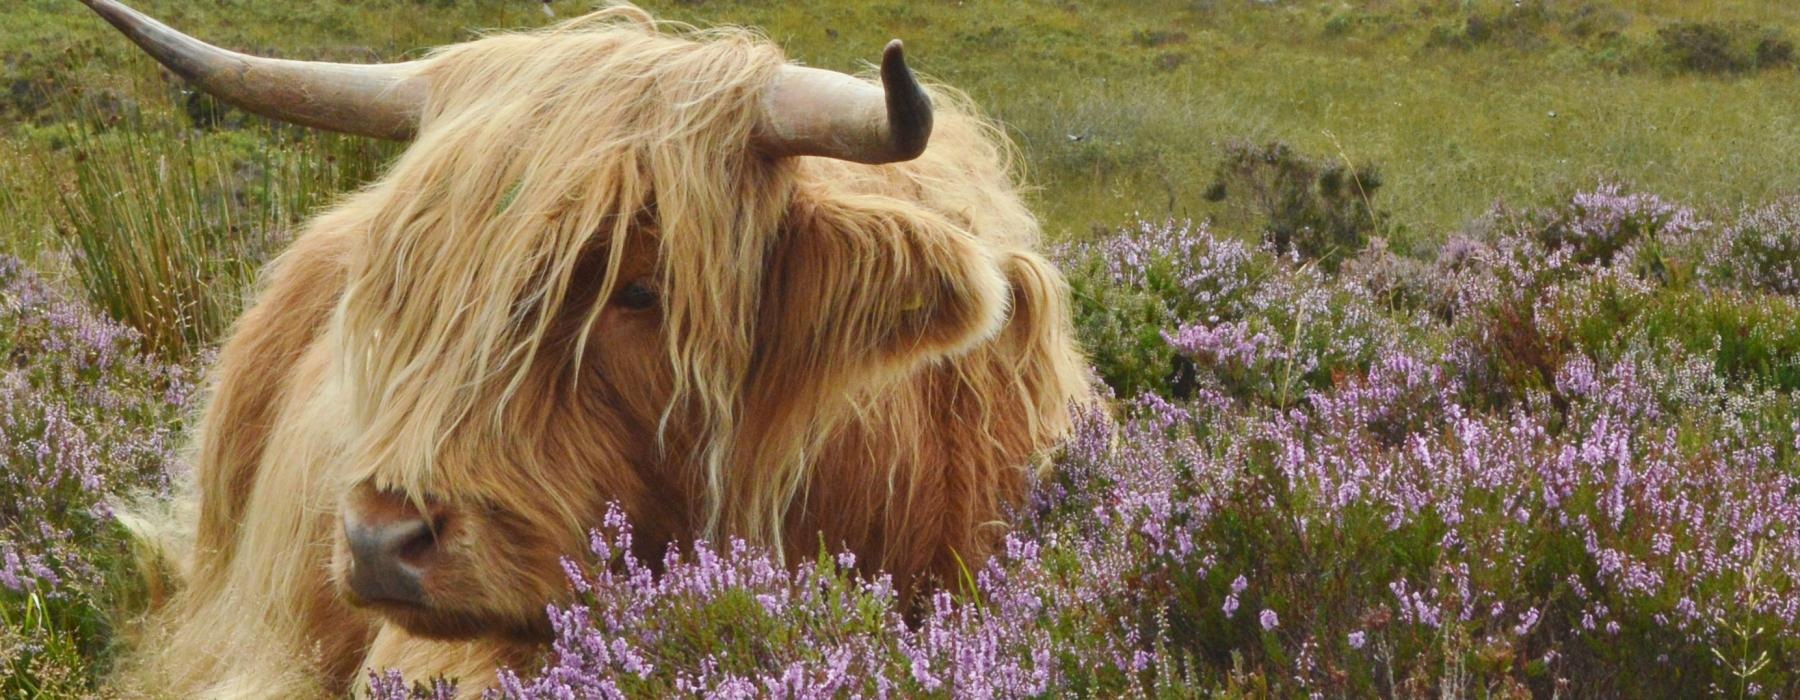 a cow with horns in a field of flowers